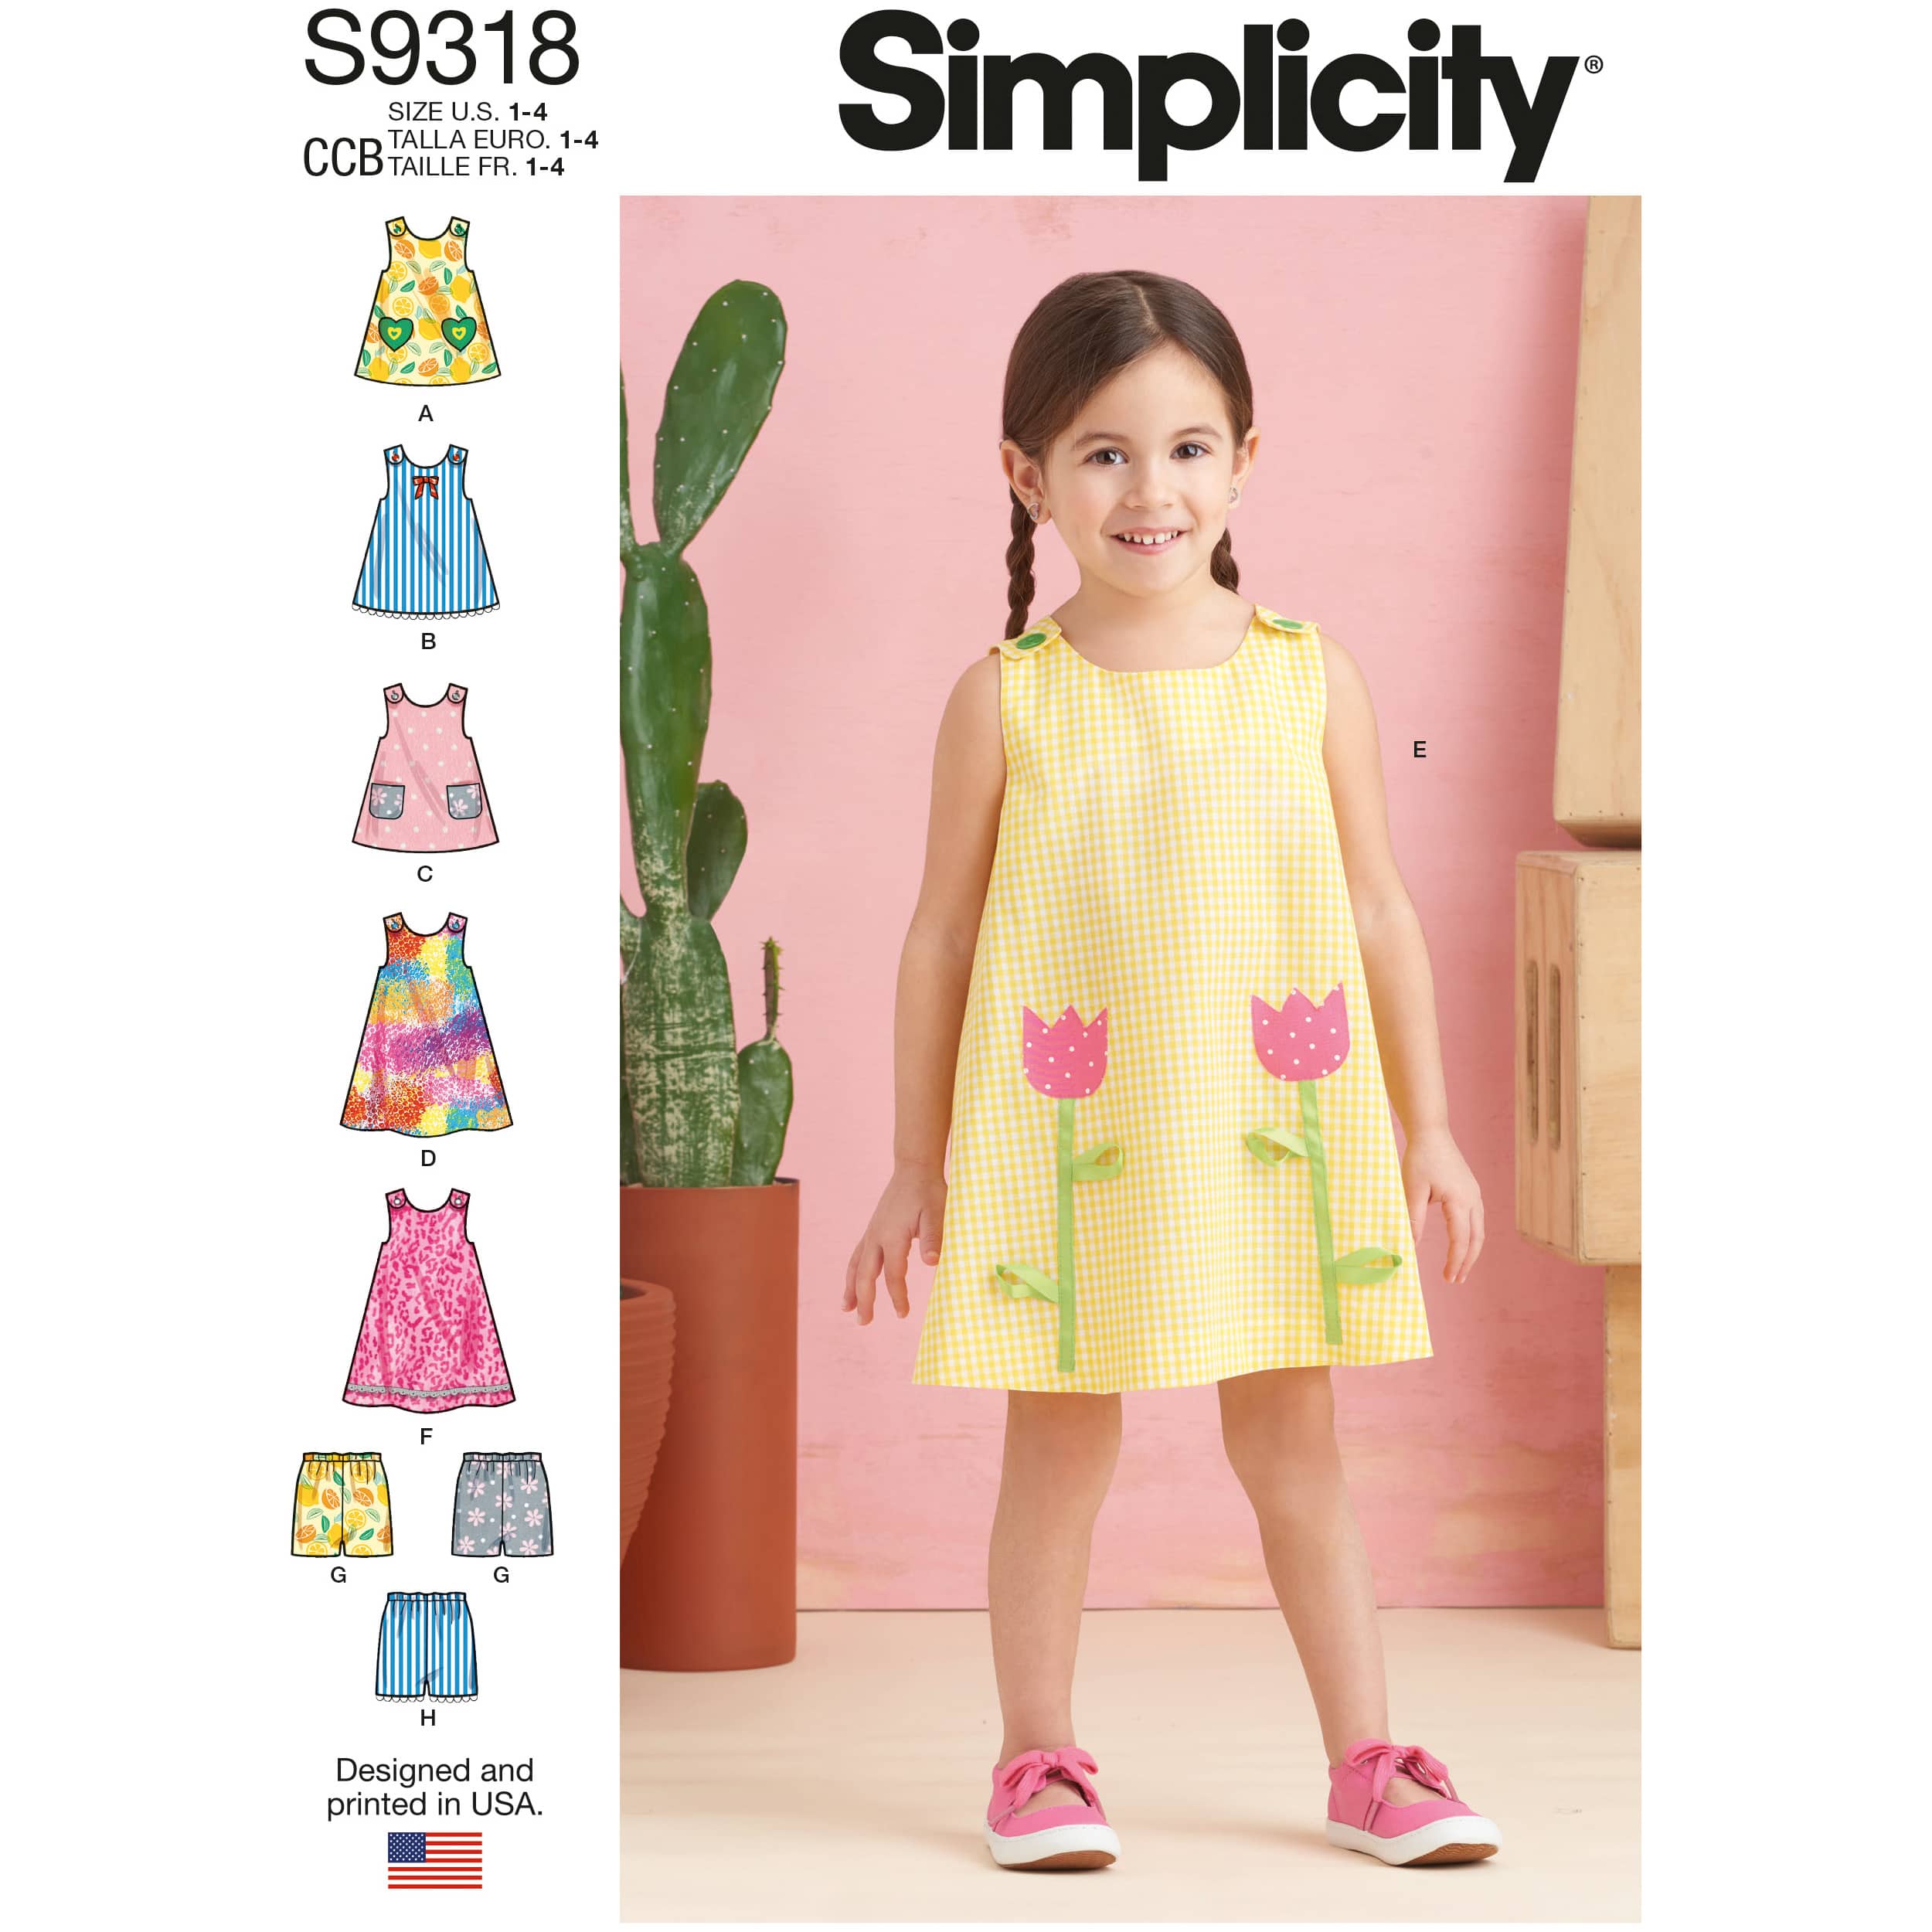 Simplicity Patterns in Sewing Patterns 